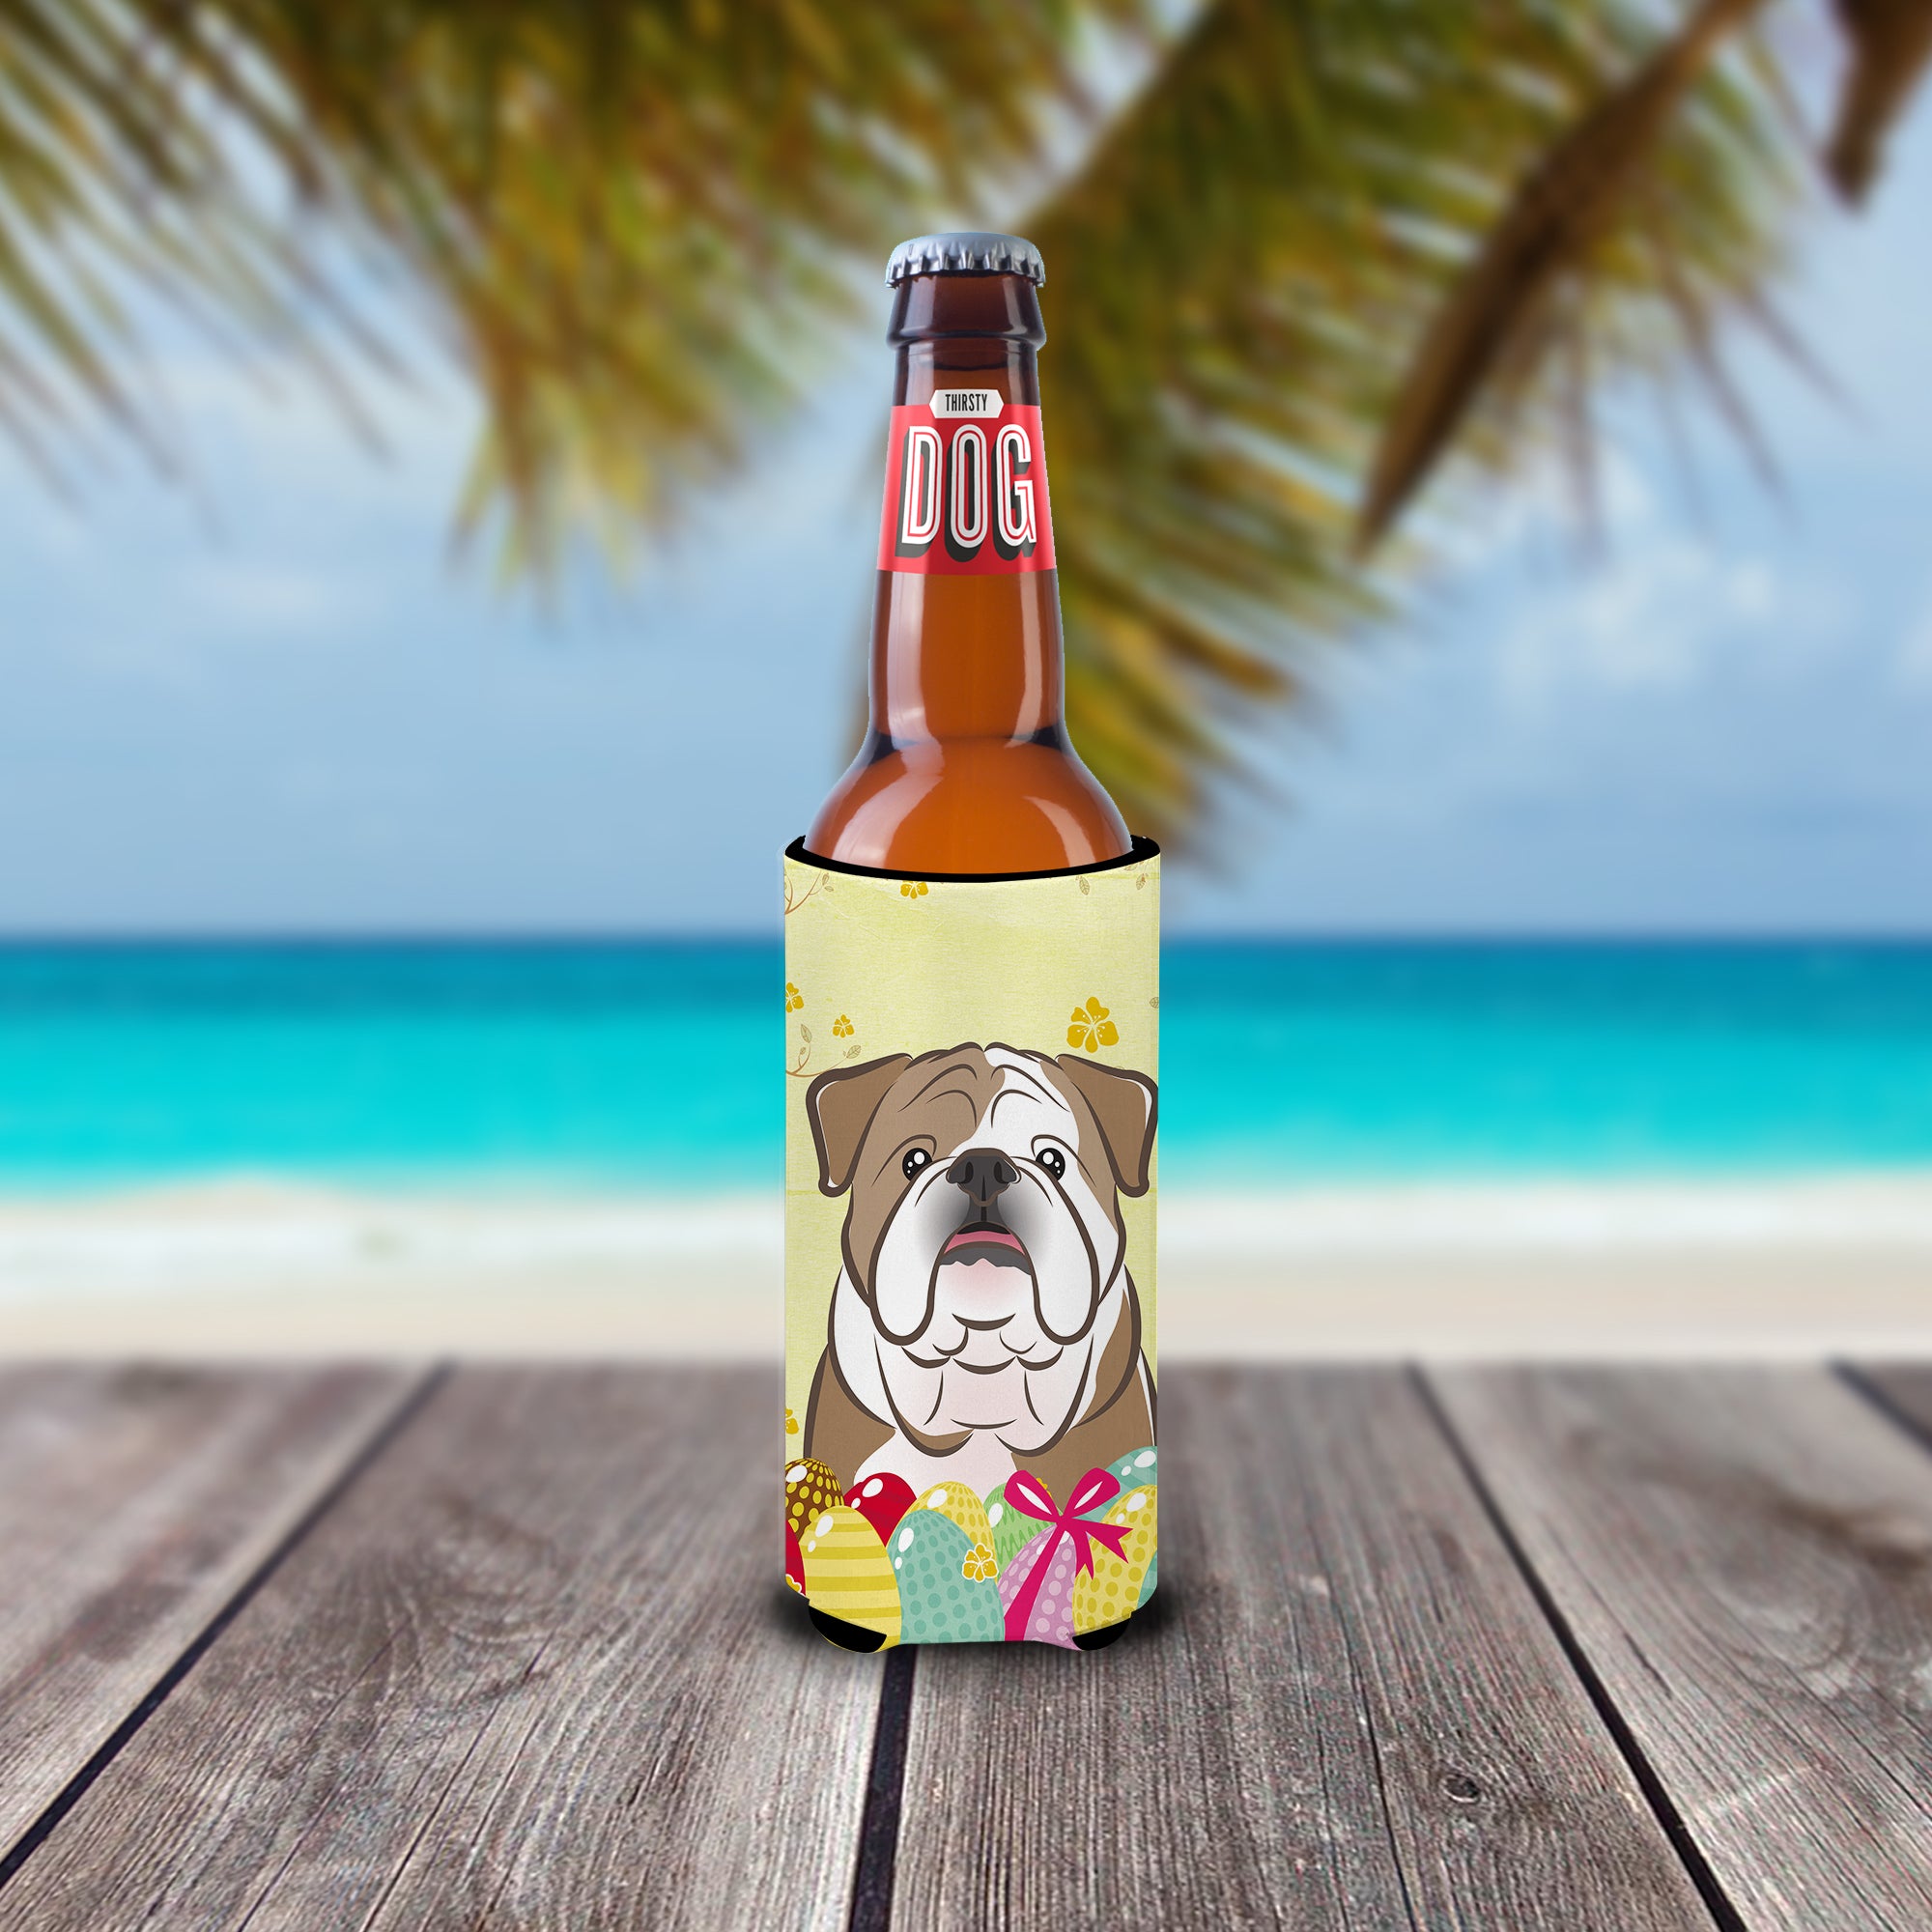 English Bulldog Easter Egg Hunt Michelob Ultra Beverage Isolateur pour canettes minces BB1901MUK